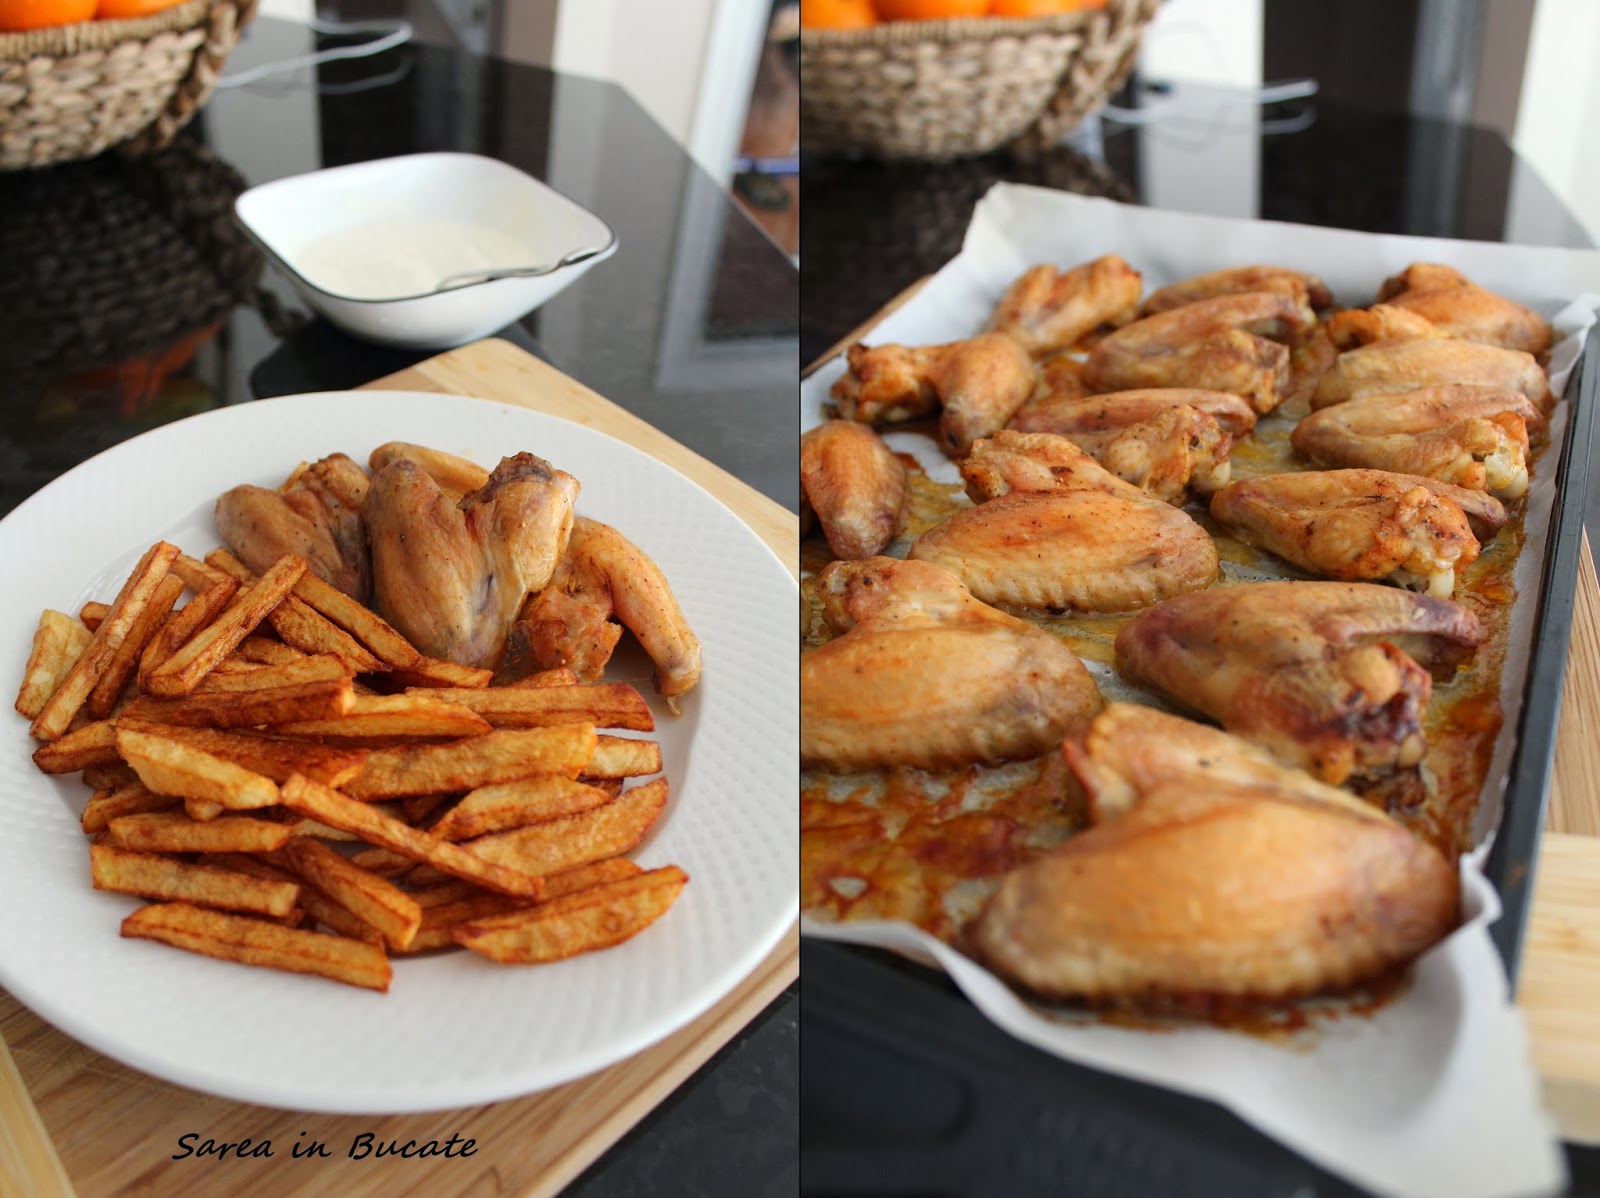 Aripioare de pui la cuptor / Baked wings and french fries ,with garlic sauce